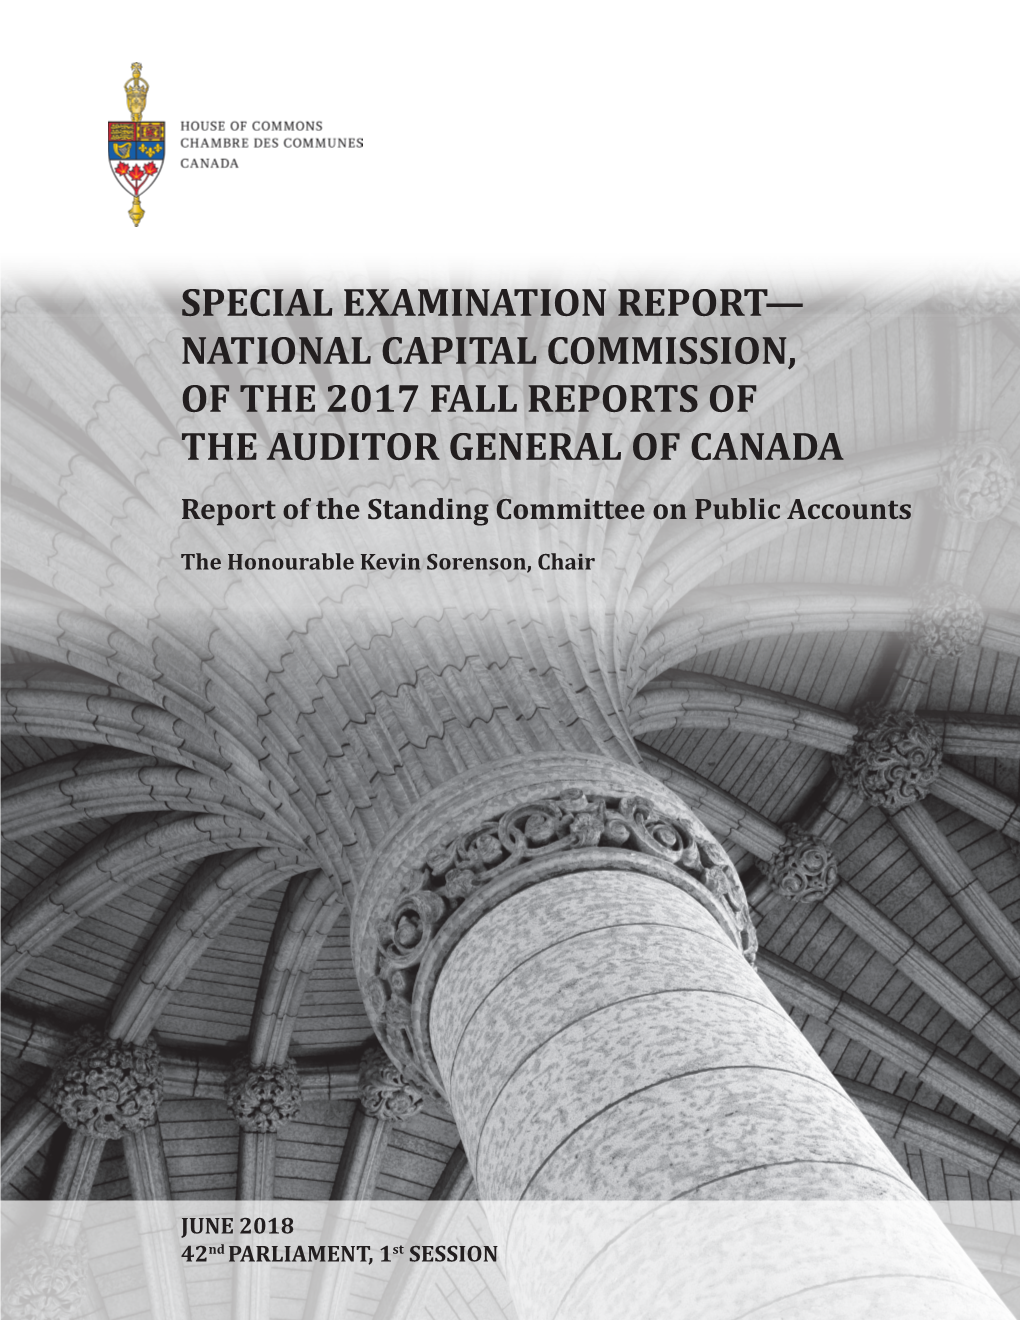 Special Examination Report—National Capital Commission, of the 2017 Fall Reports of the Auditor General of Canada